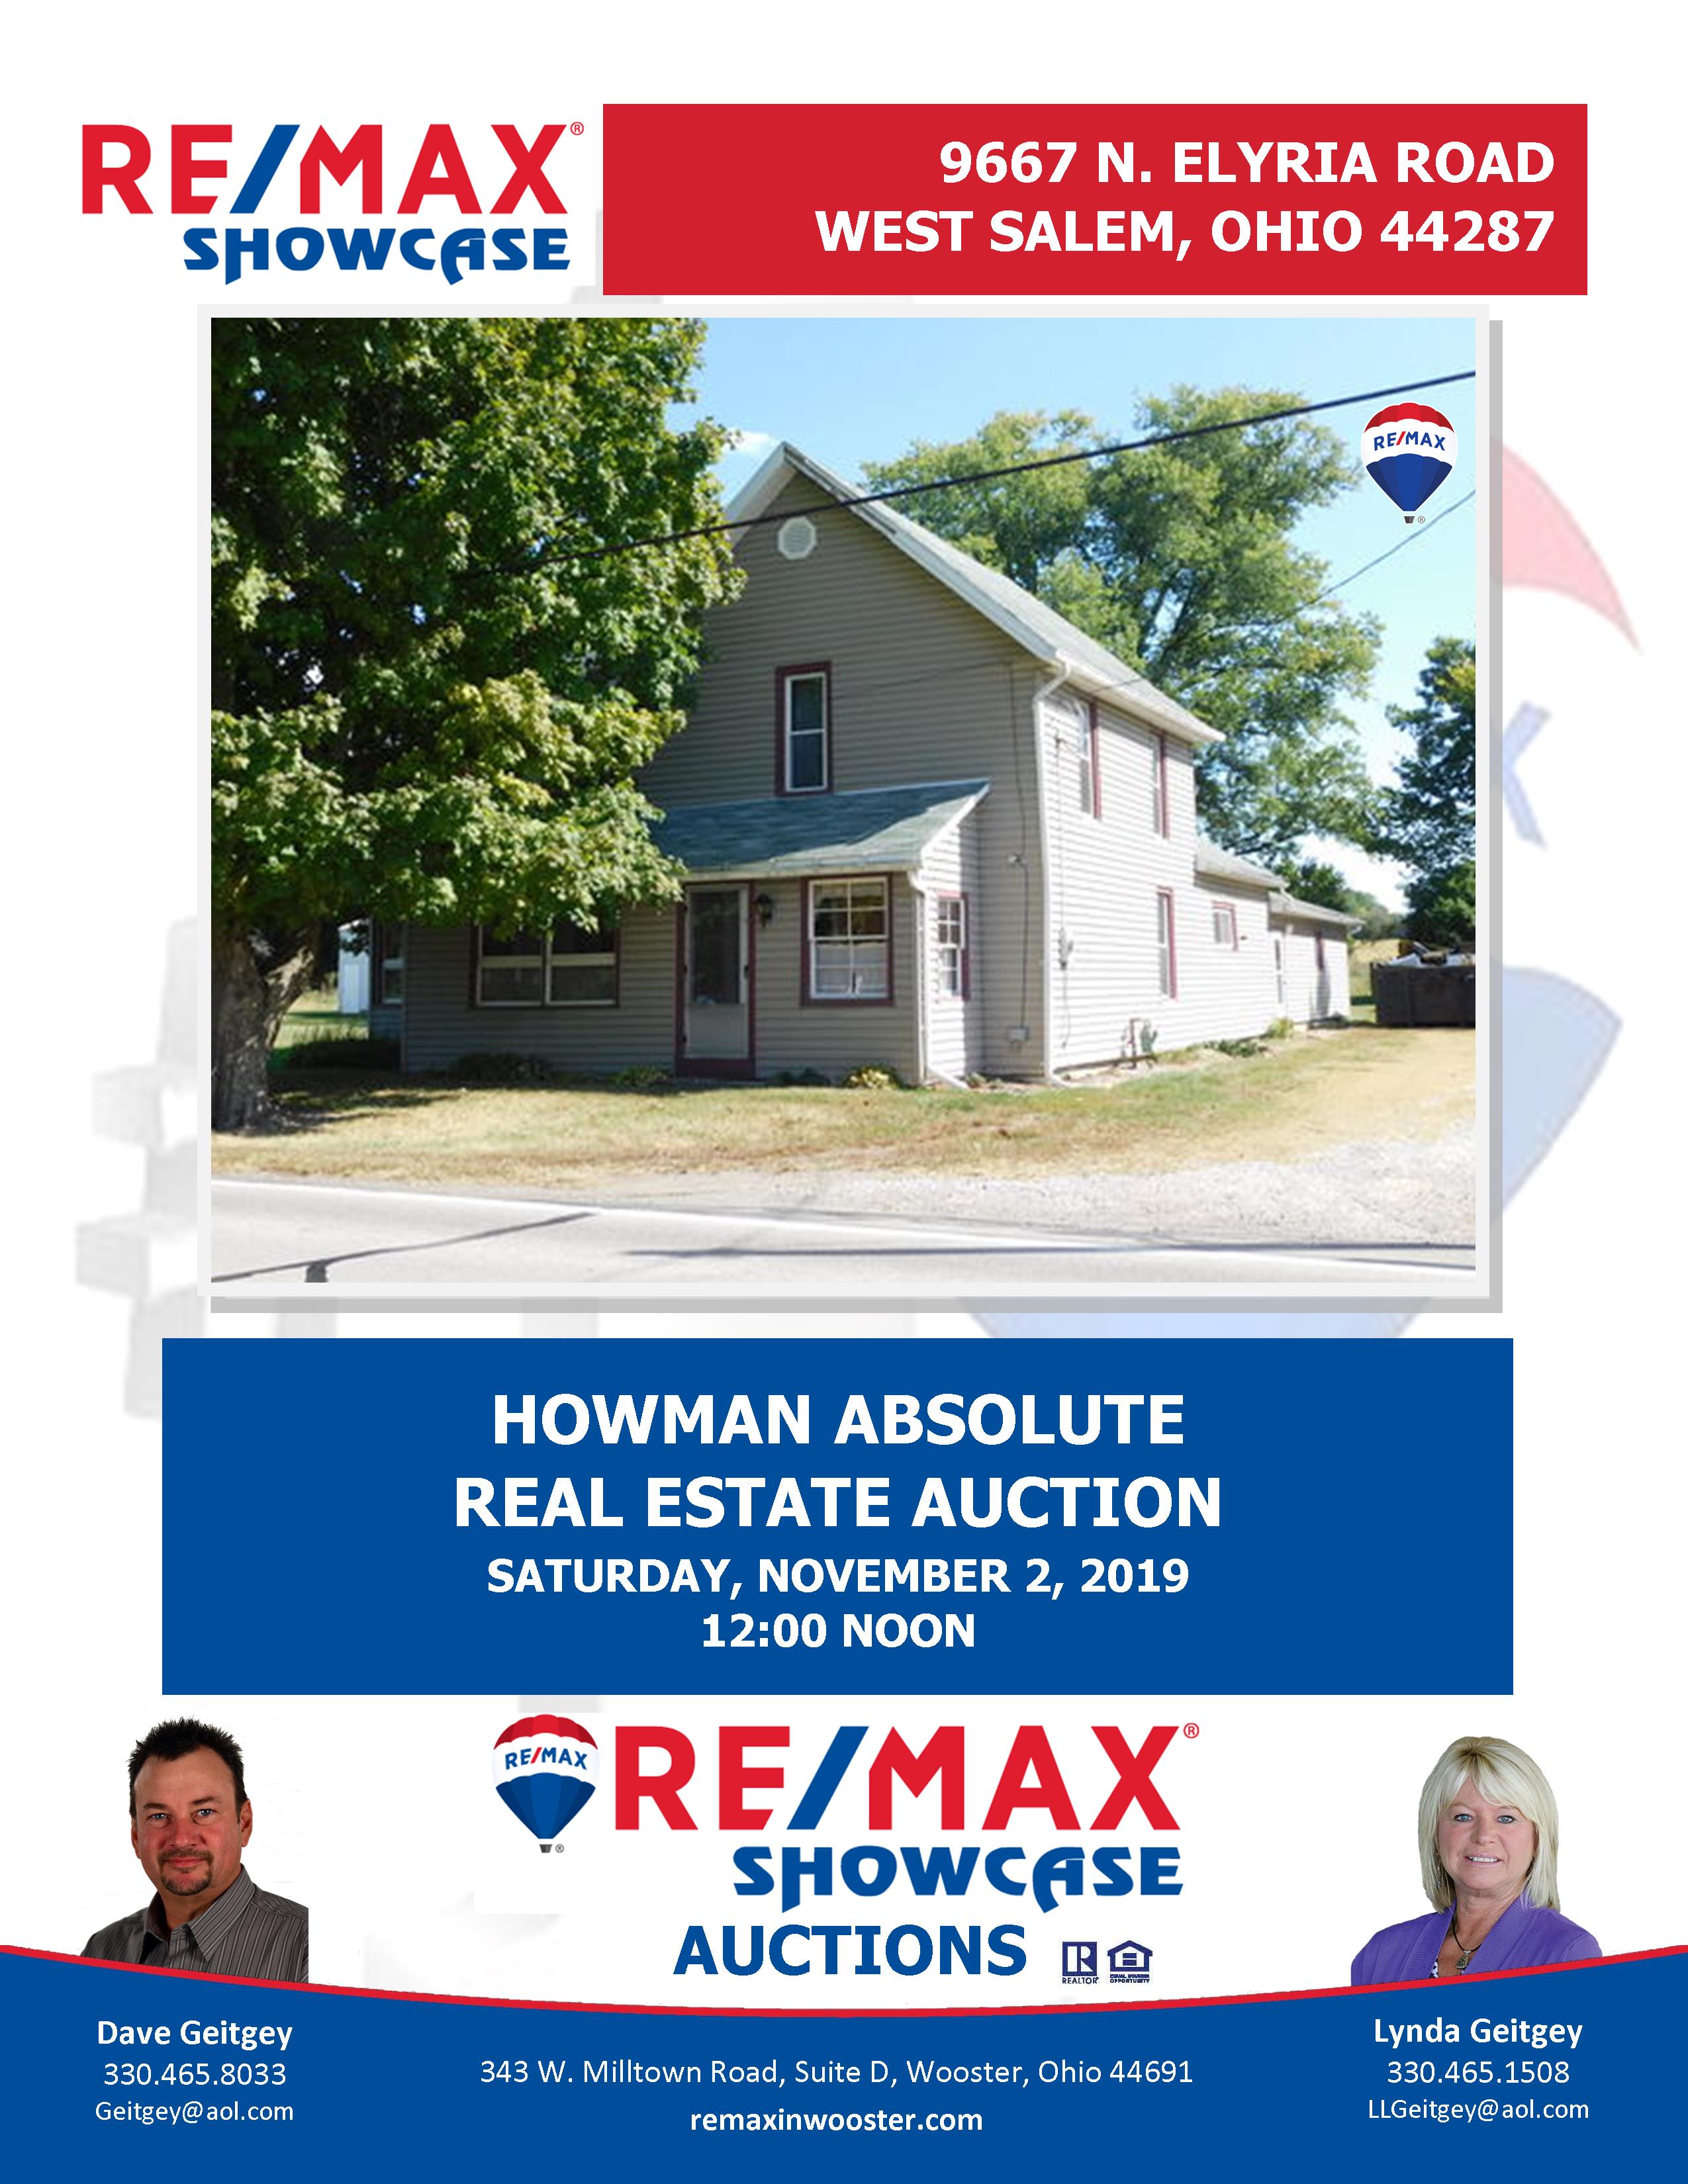 real estate auctioneer